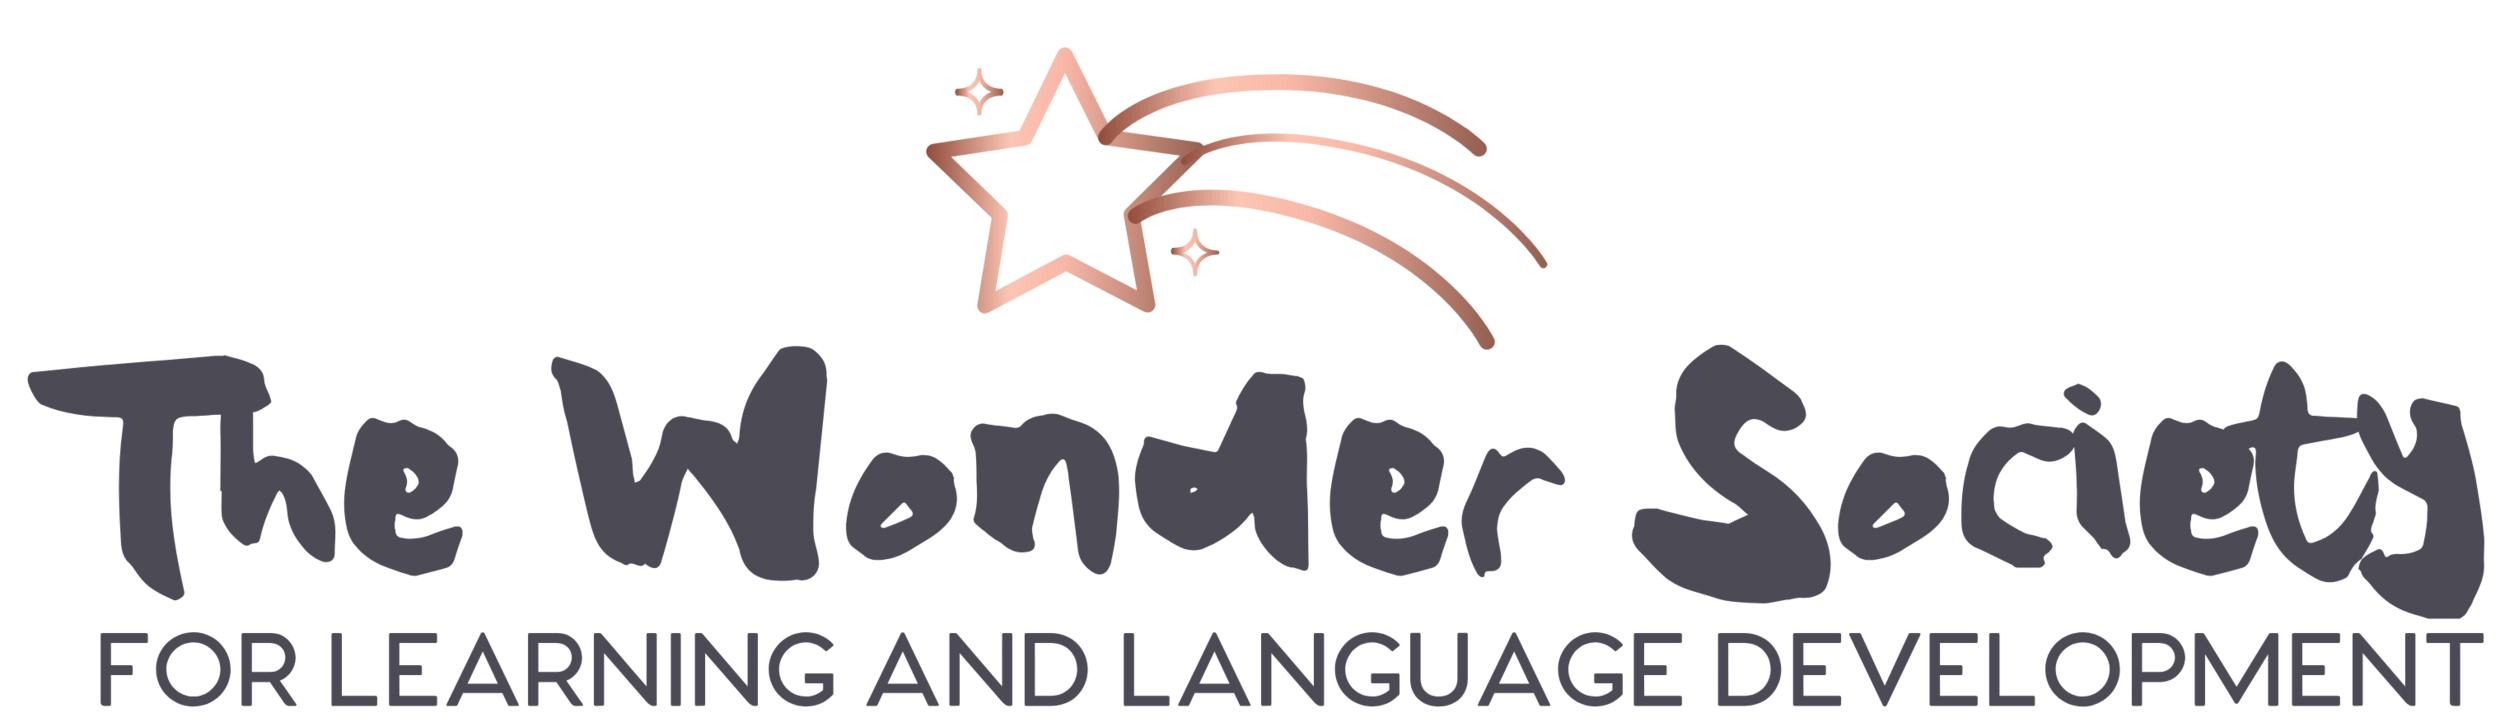 The Wonder Society for Learning and Language Development